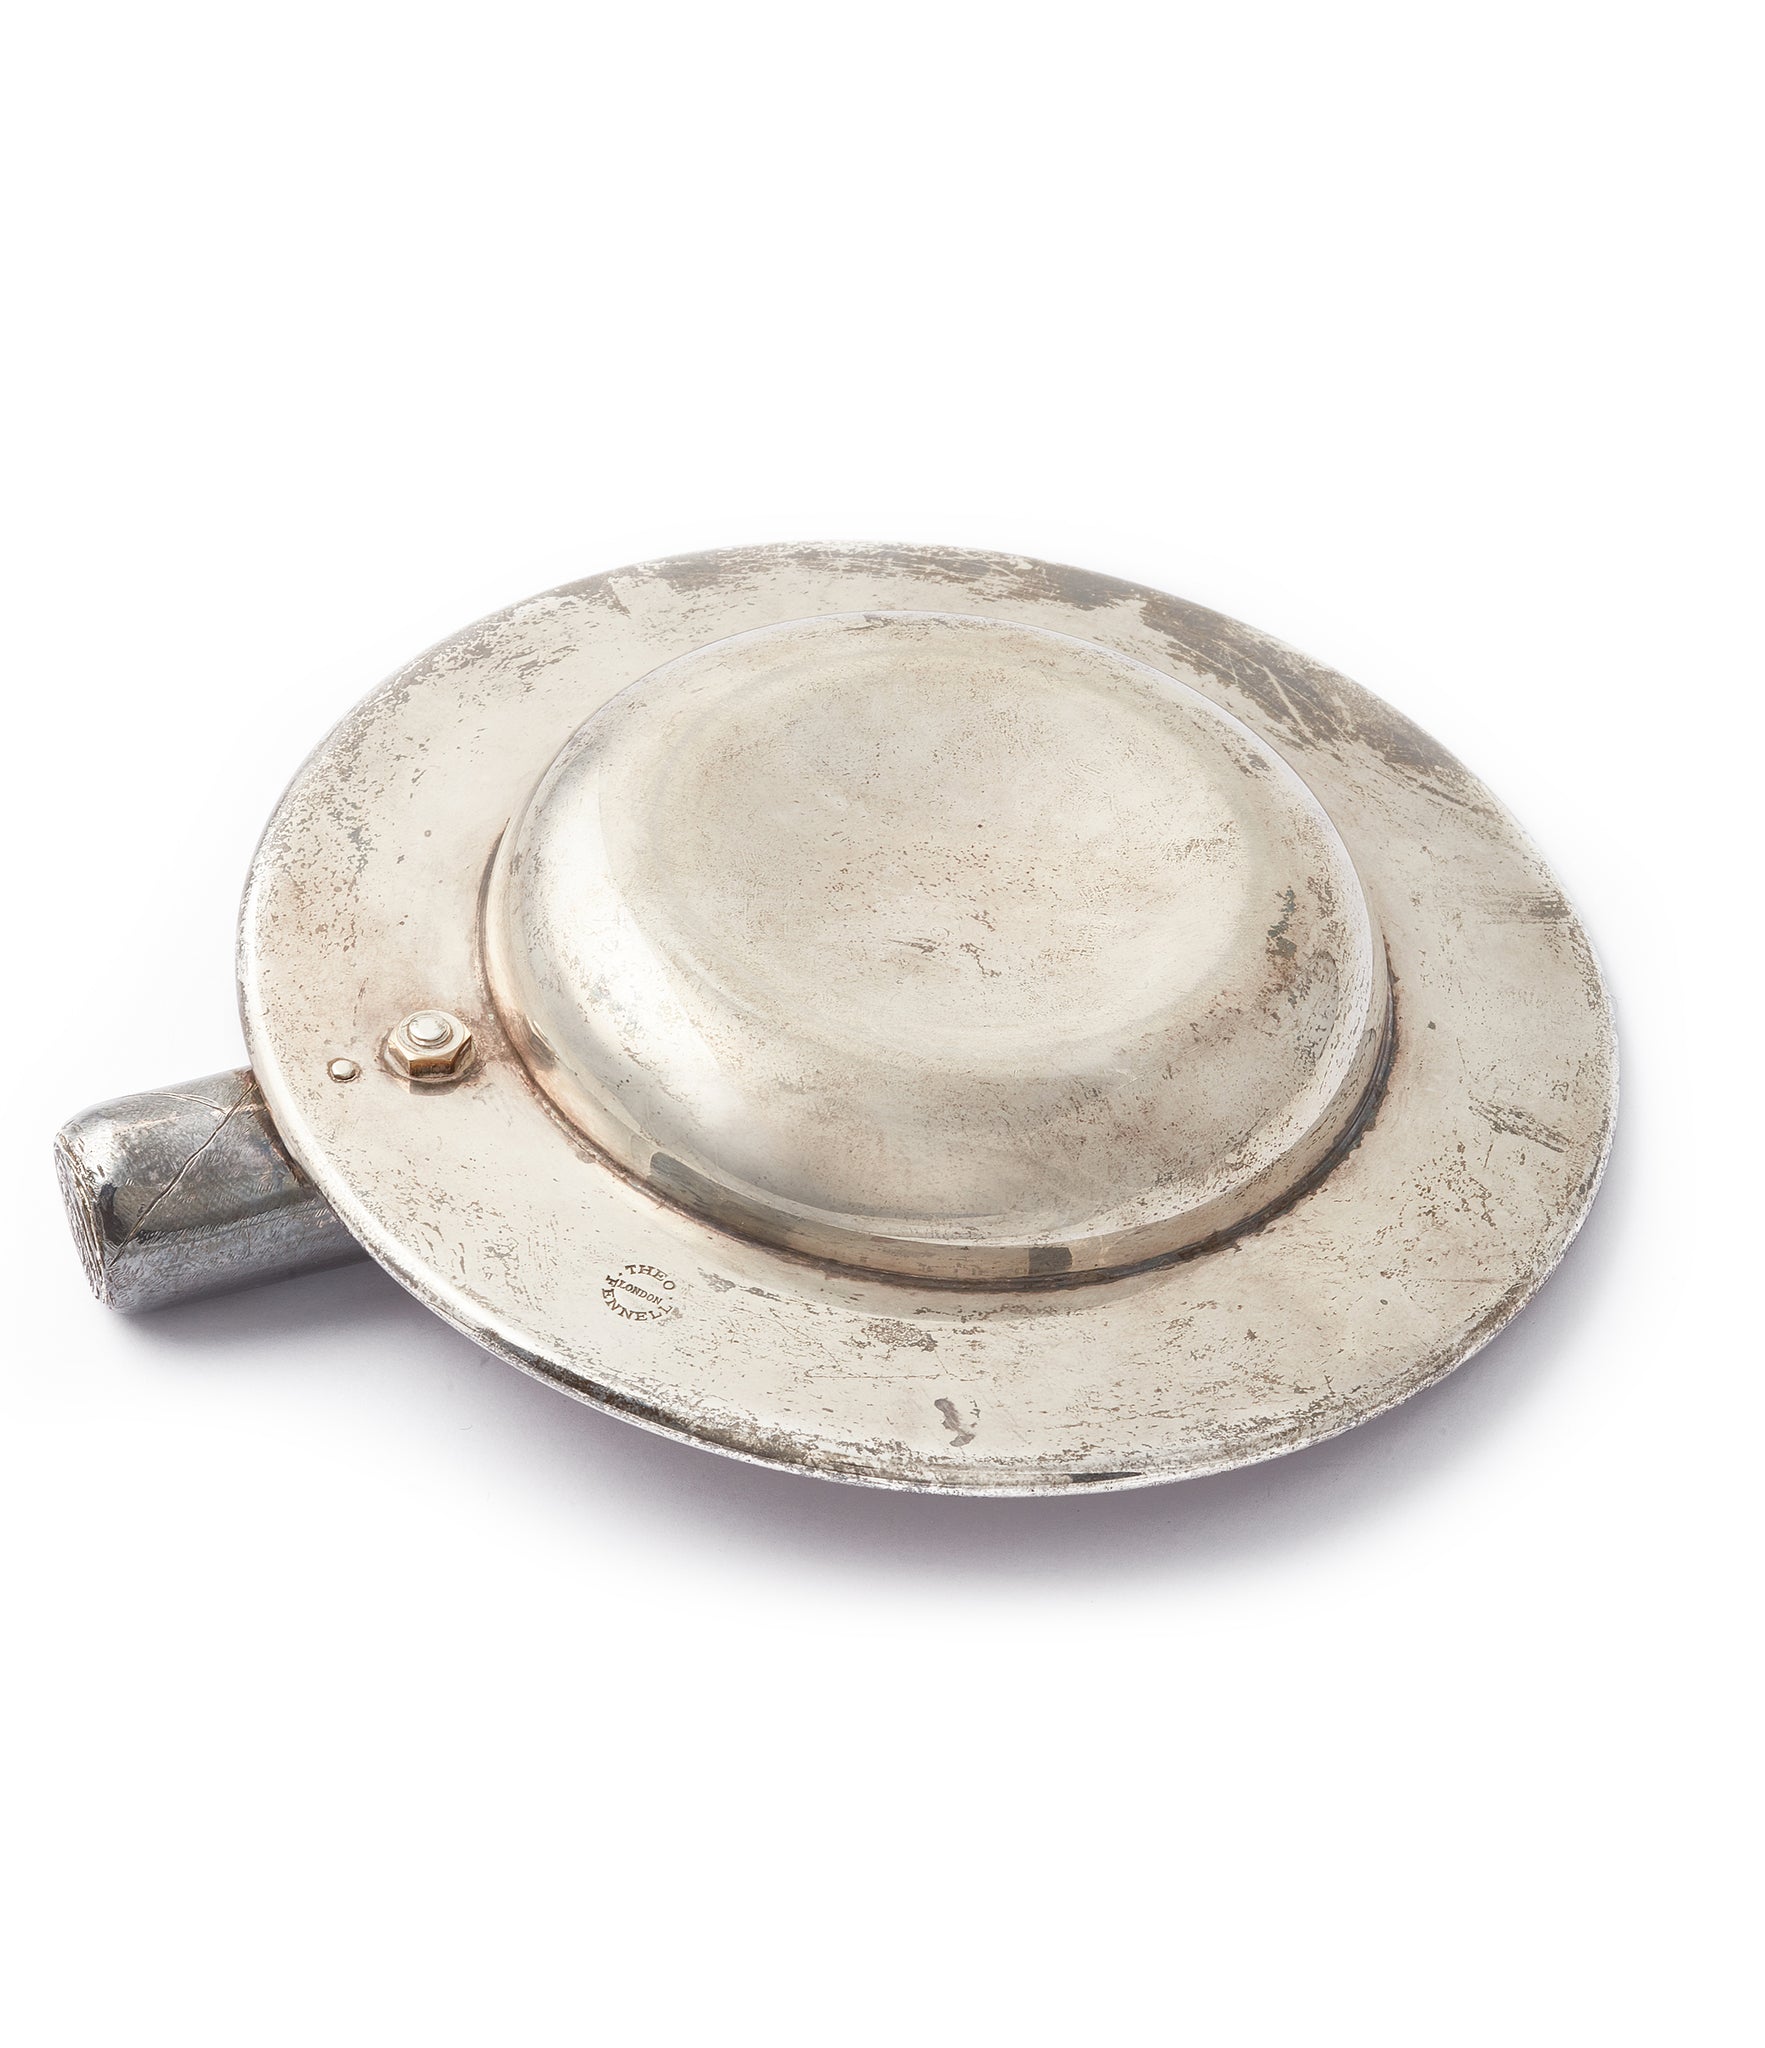 for sale Sir David Tang's personal silver cigar ashtray made by Theo Fennel collectable men's rare object A Collected Man London